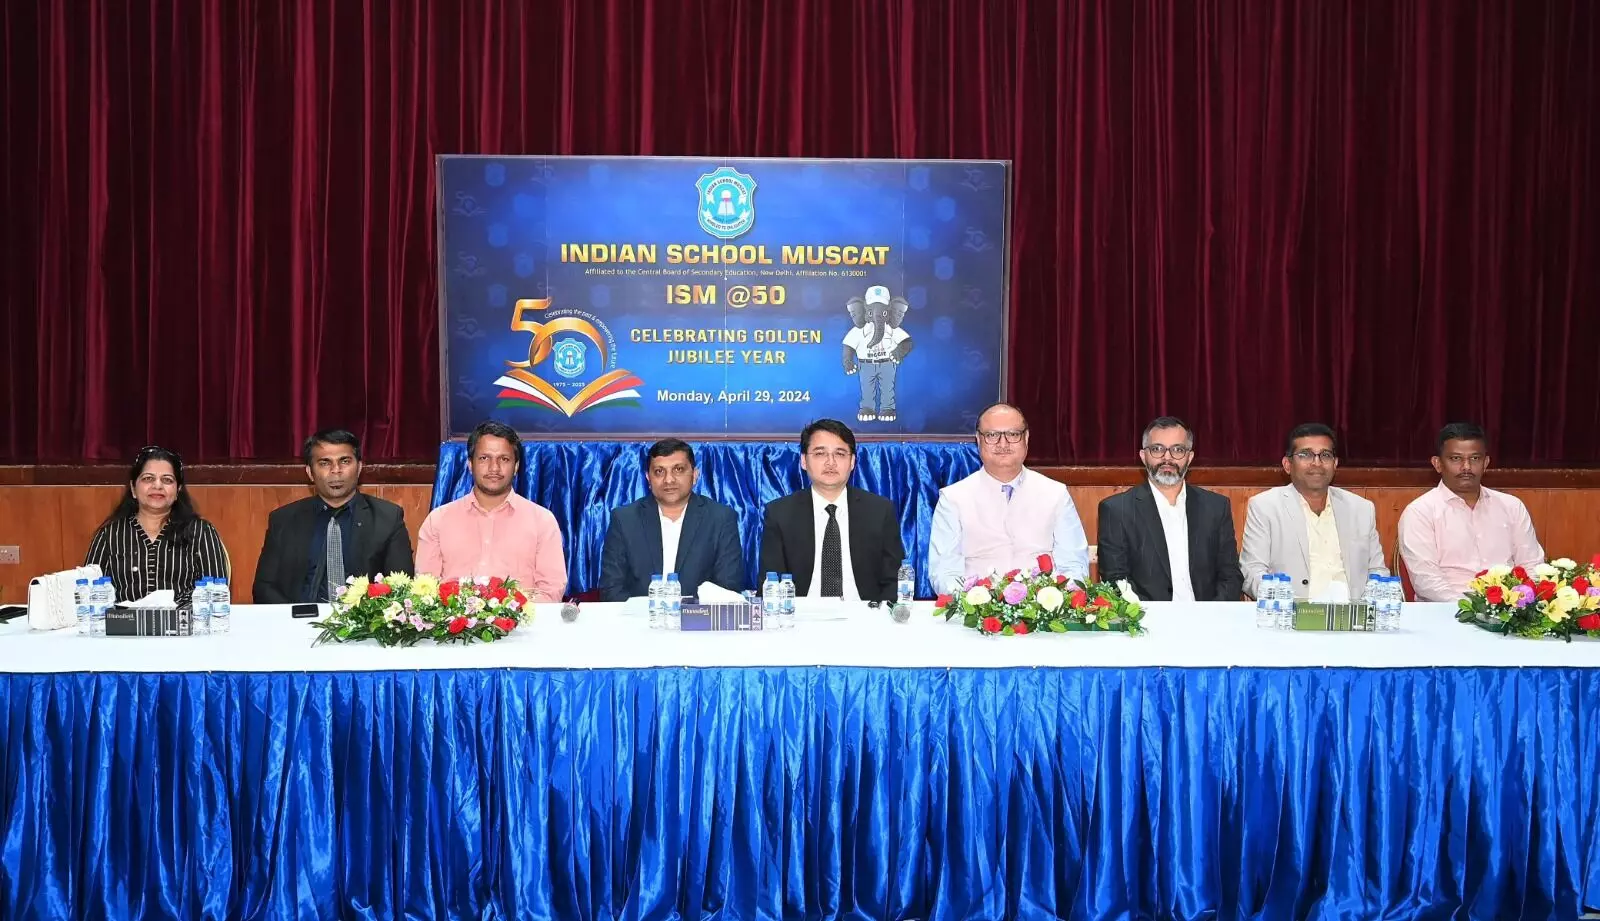 Indian School Muscat celebrates 50 Years of educational excellence